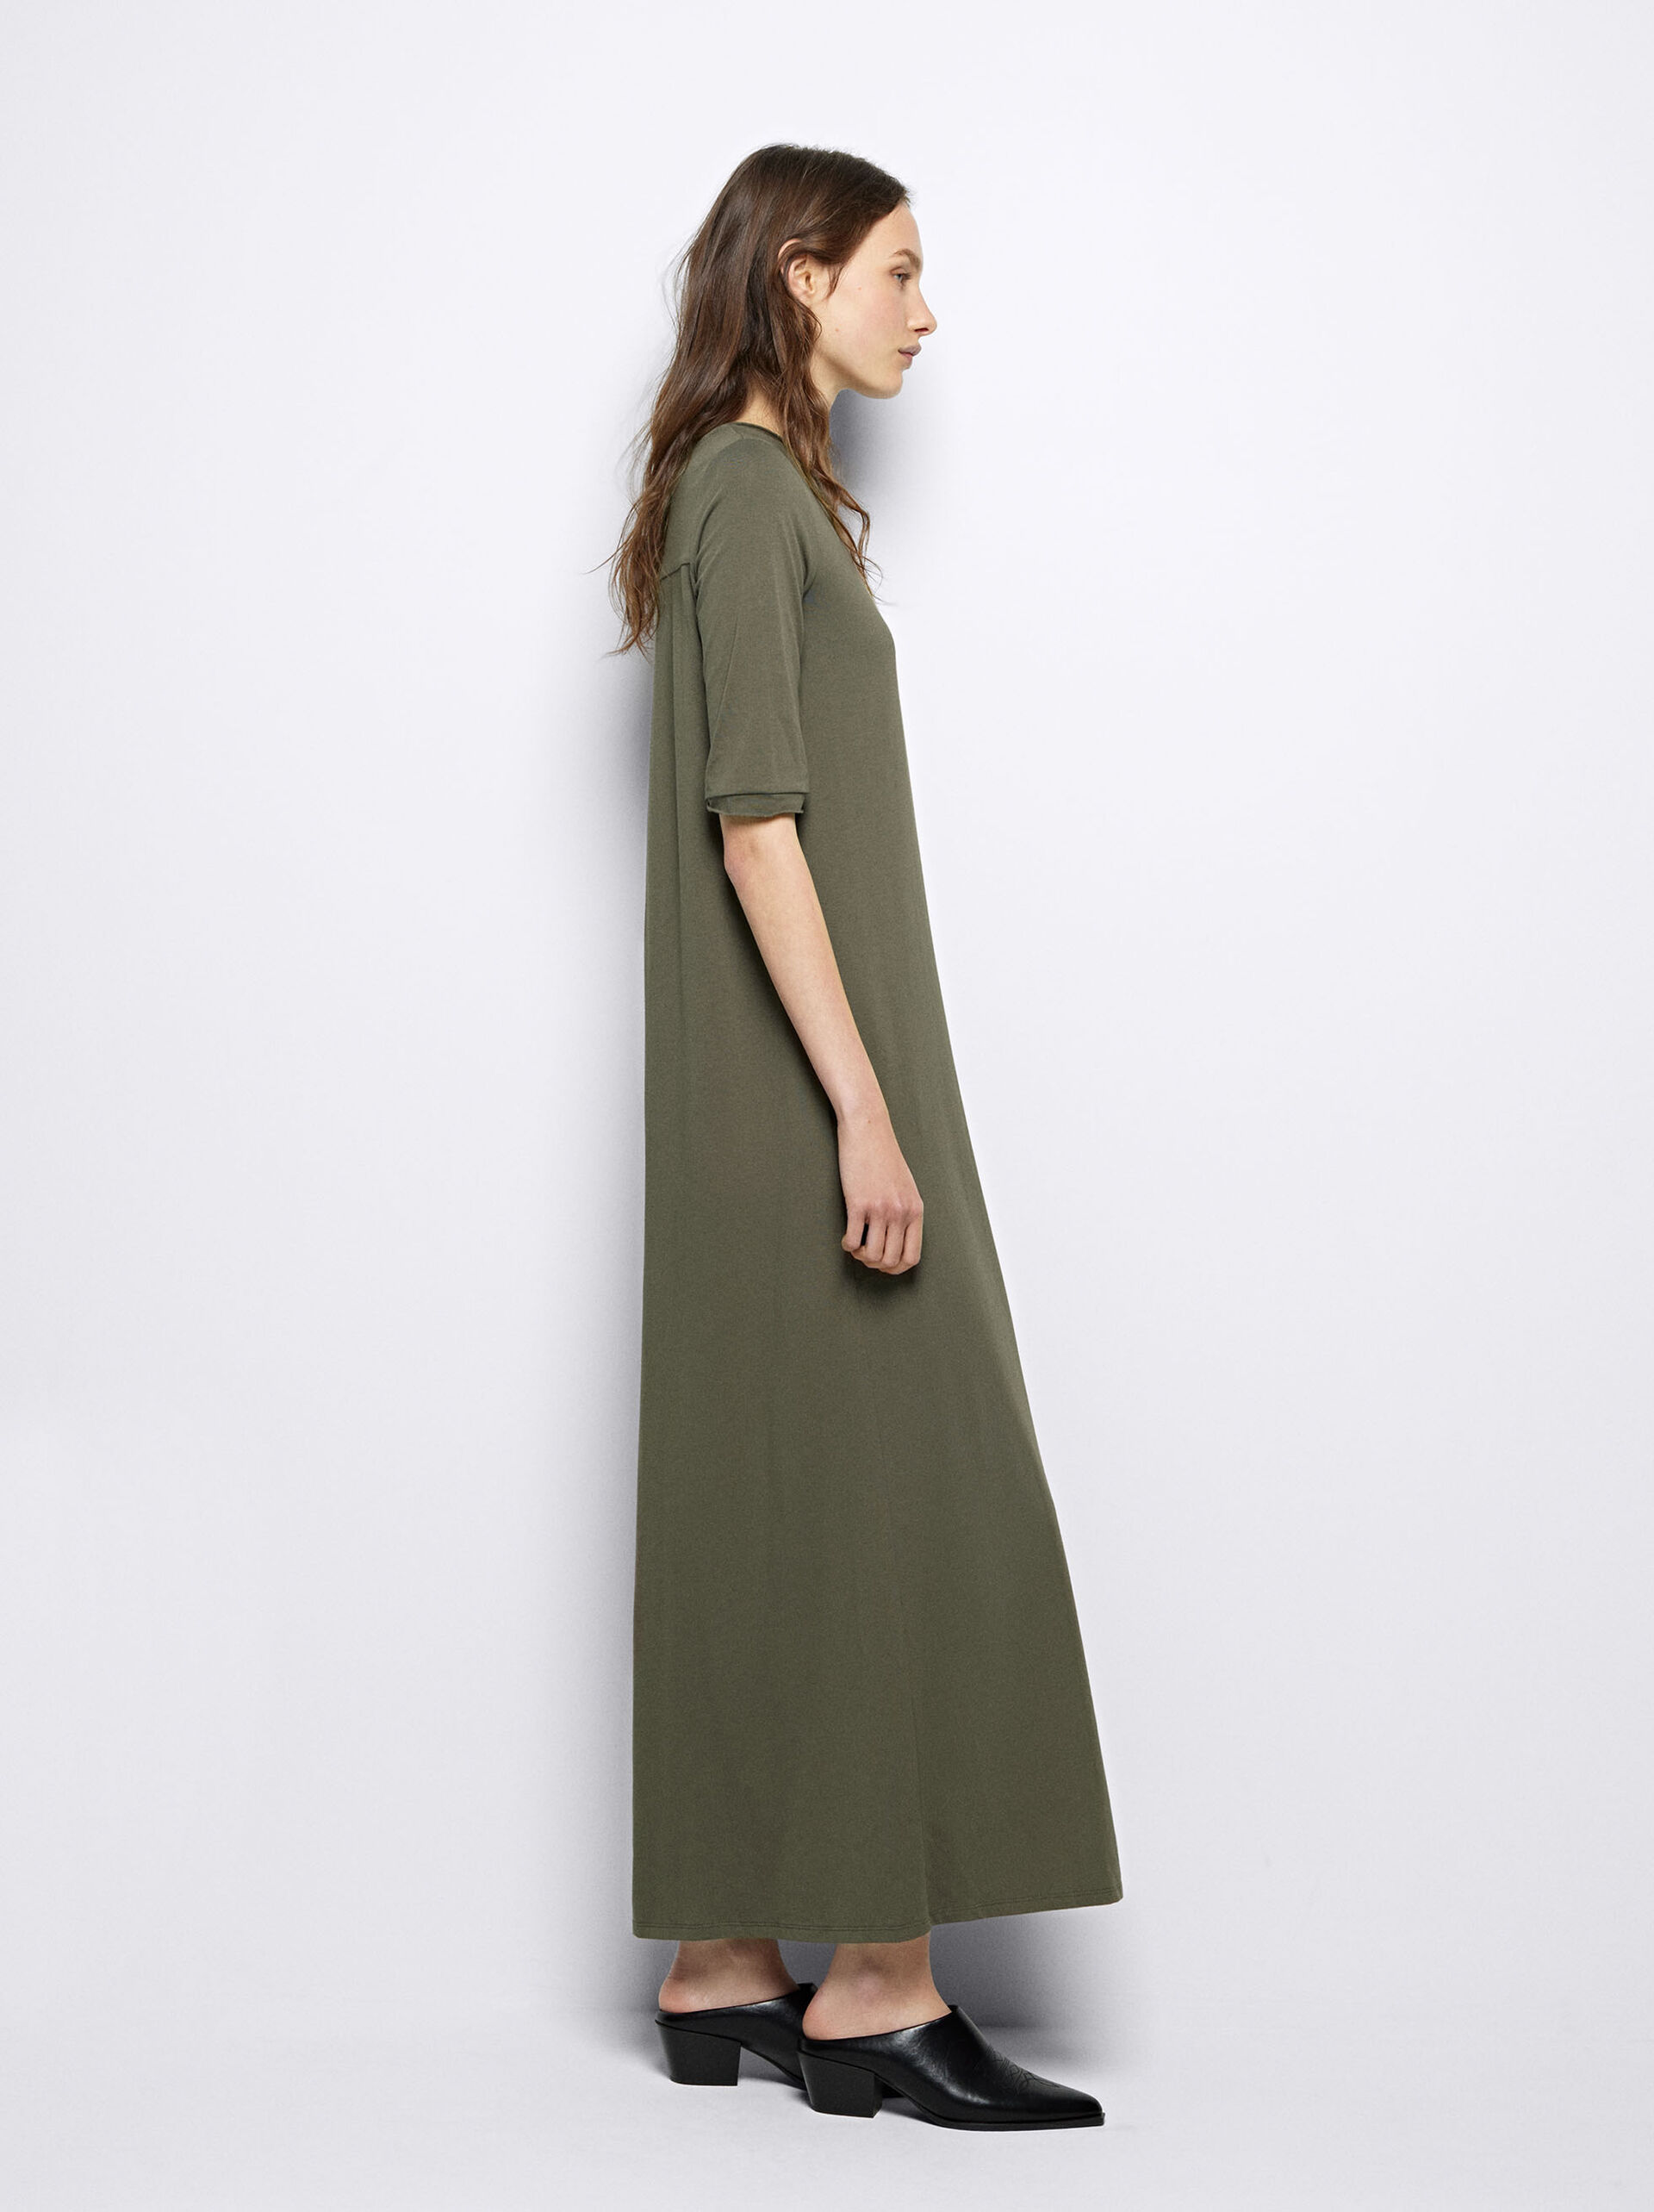 Flowy Cotton Dress image number 3.0